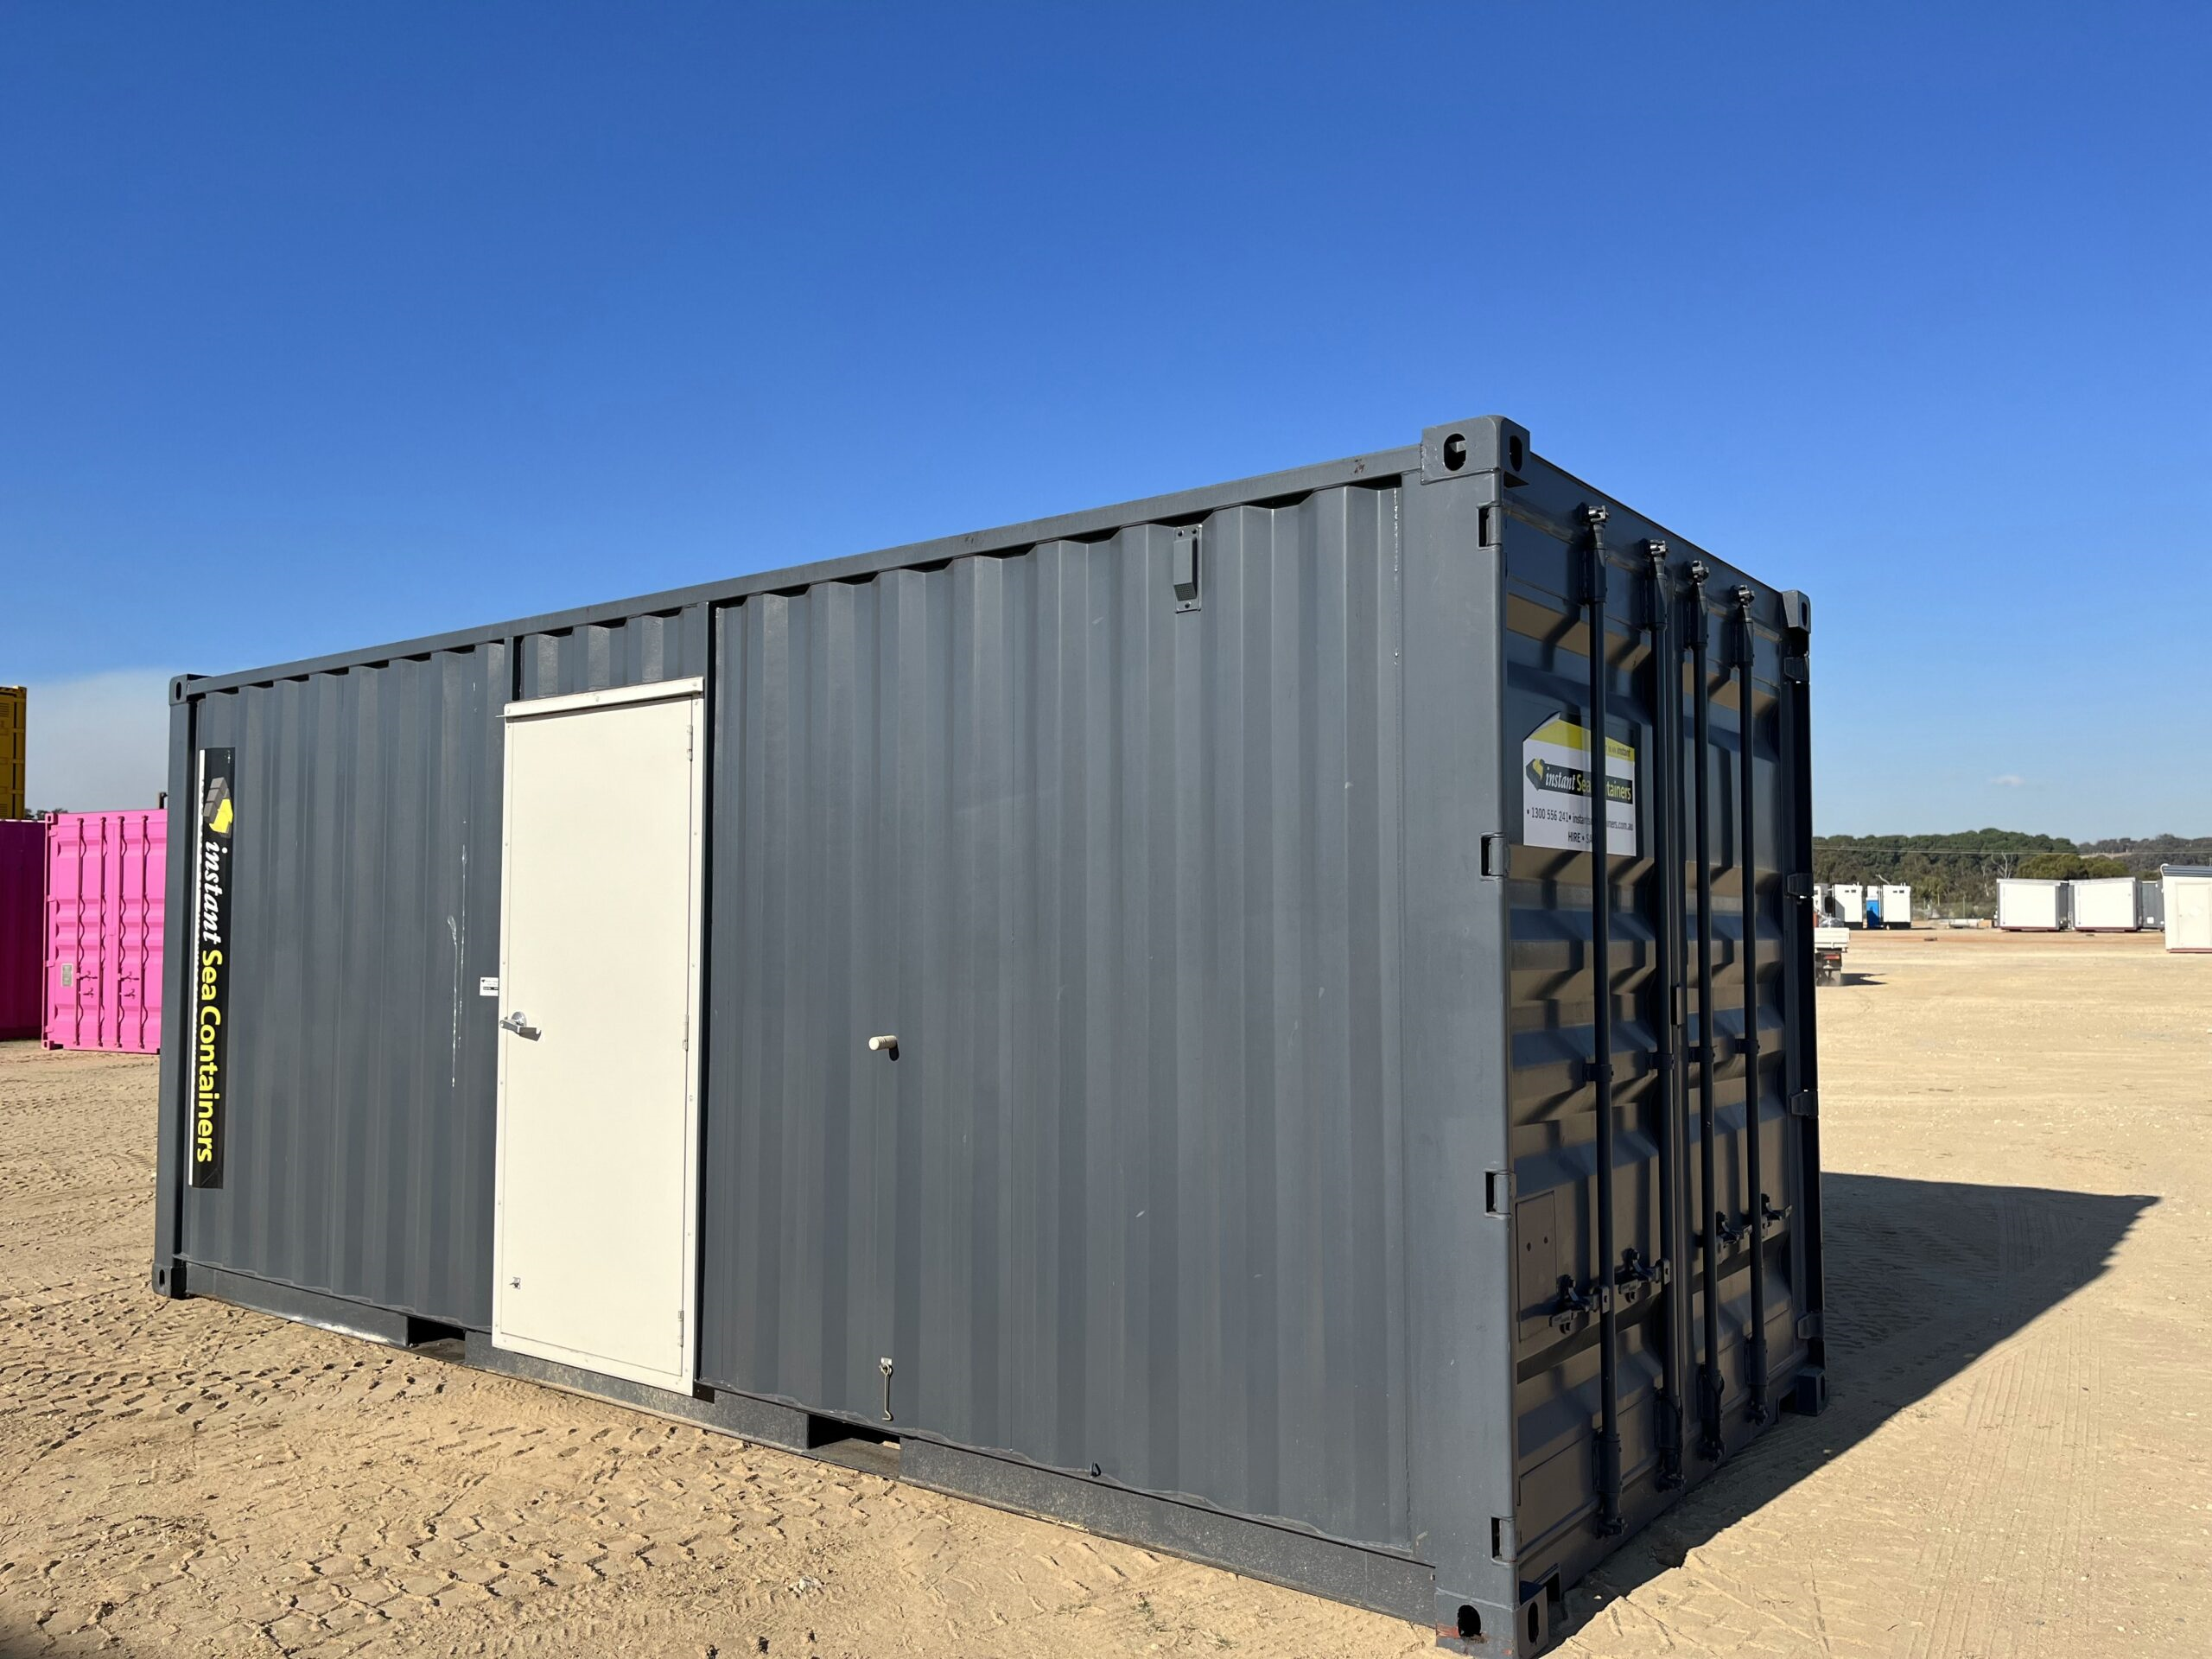 Shipping Container Workshop with a secure door added to one side, situated in a large open area with other containers visible in the background.